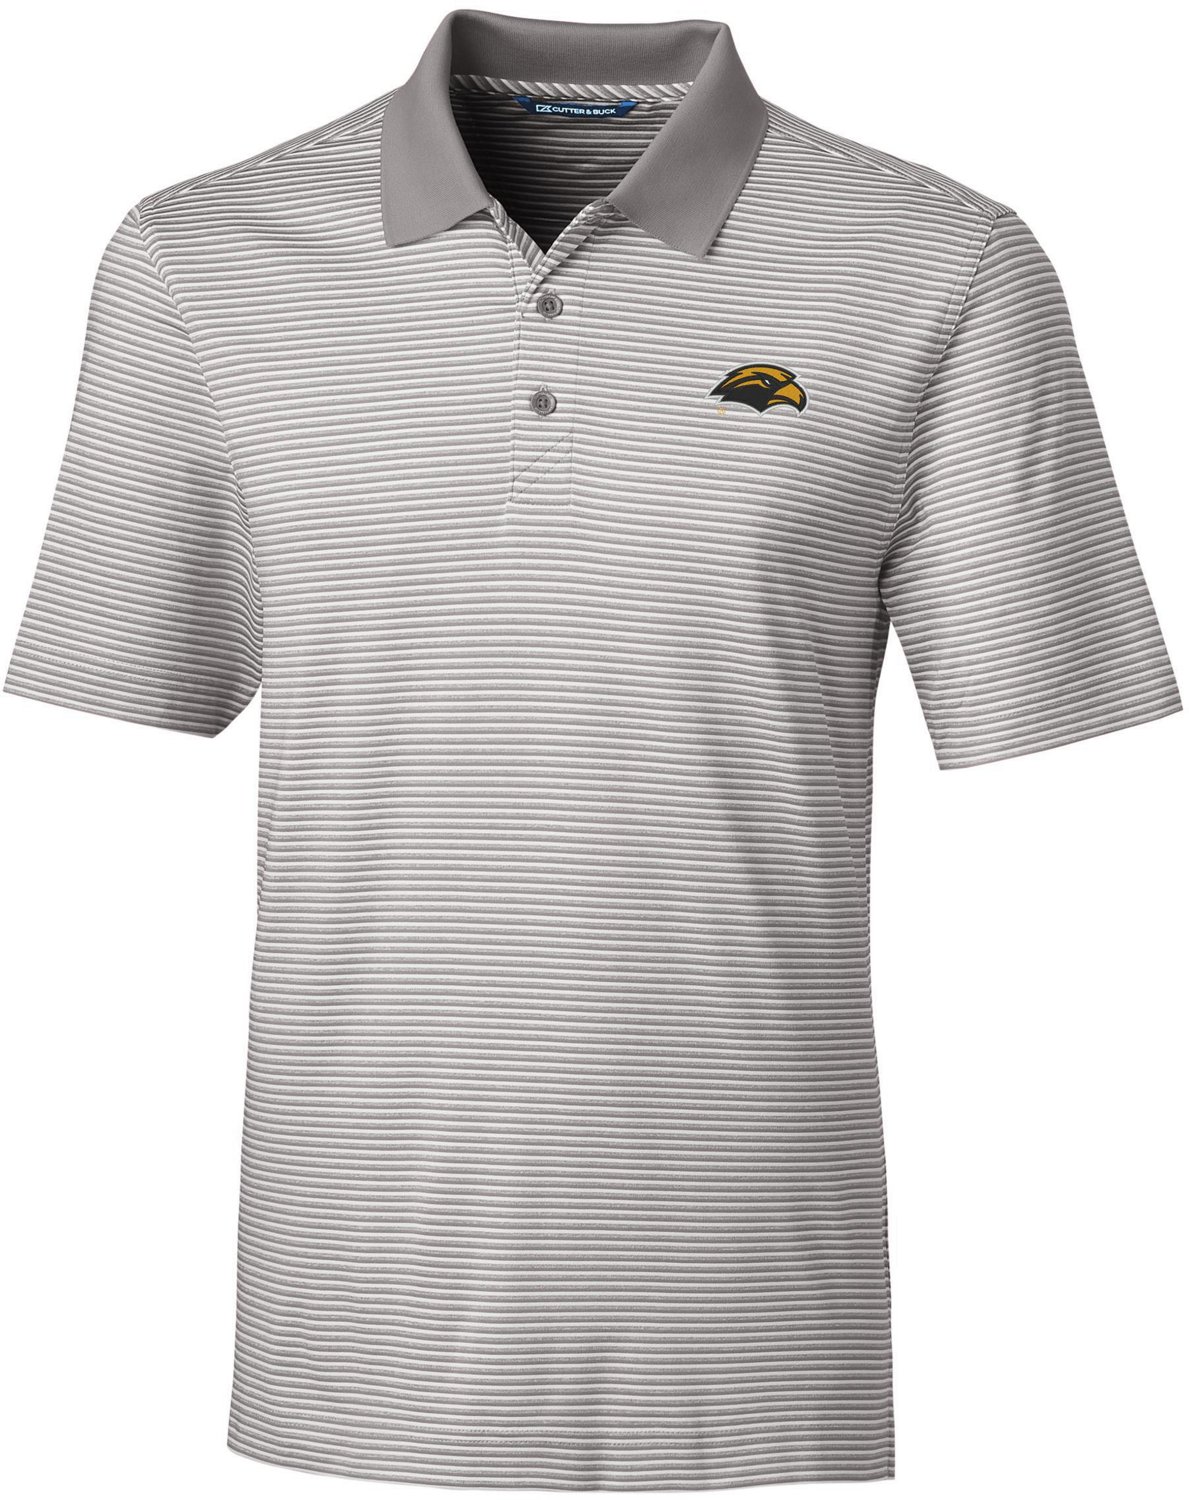 Cutter & Buck Men's University of Southern Mississippi Forge Tonal ...